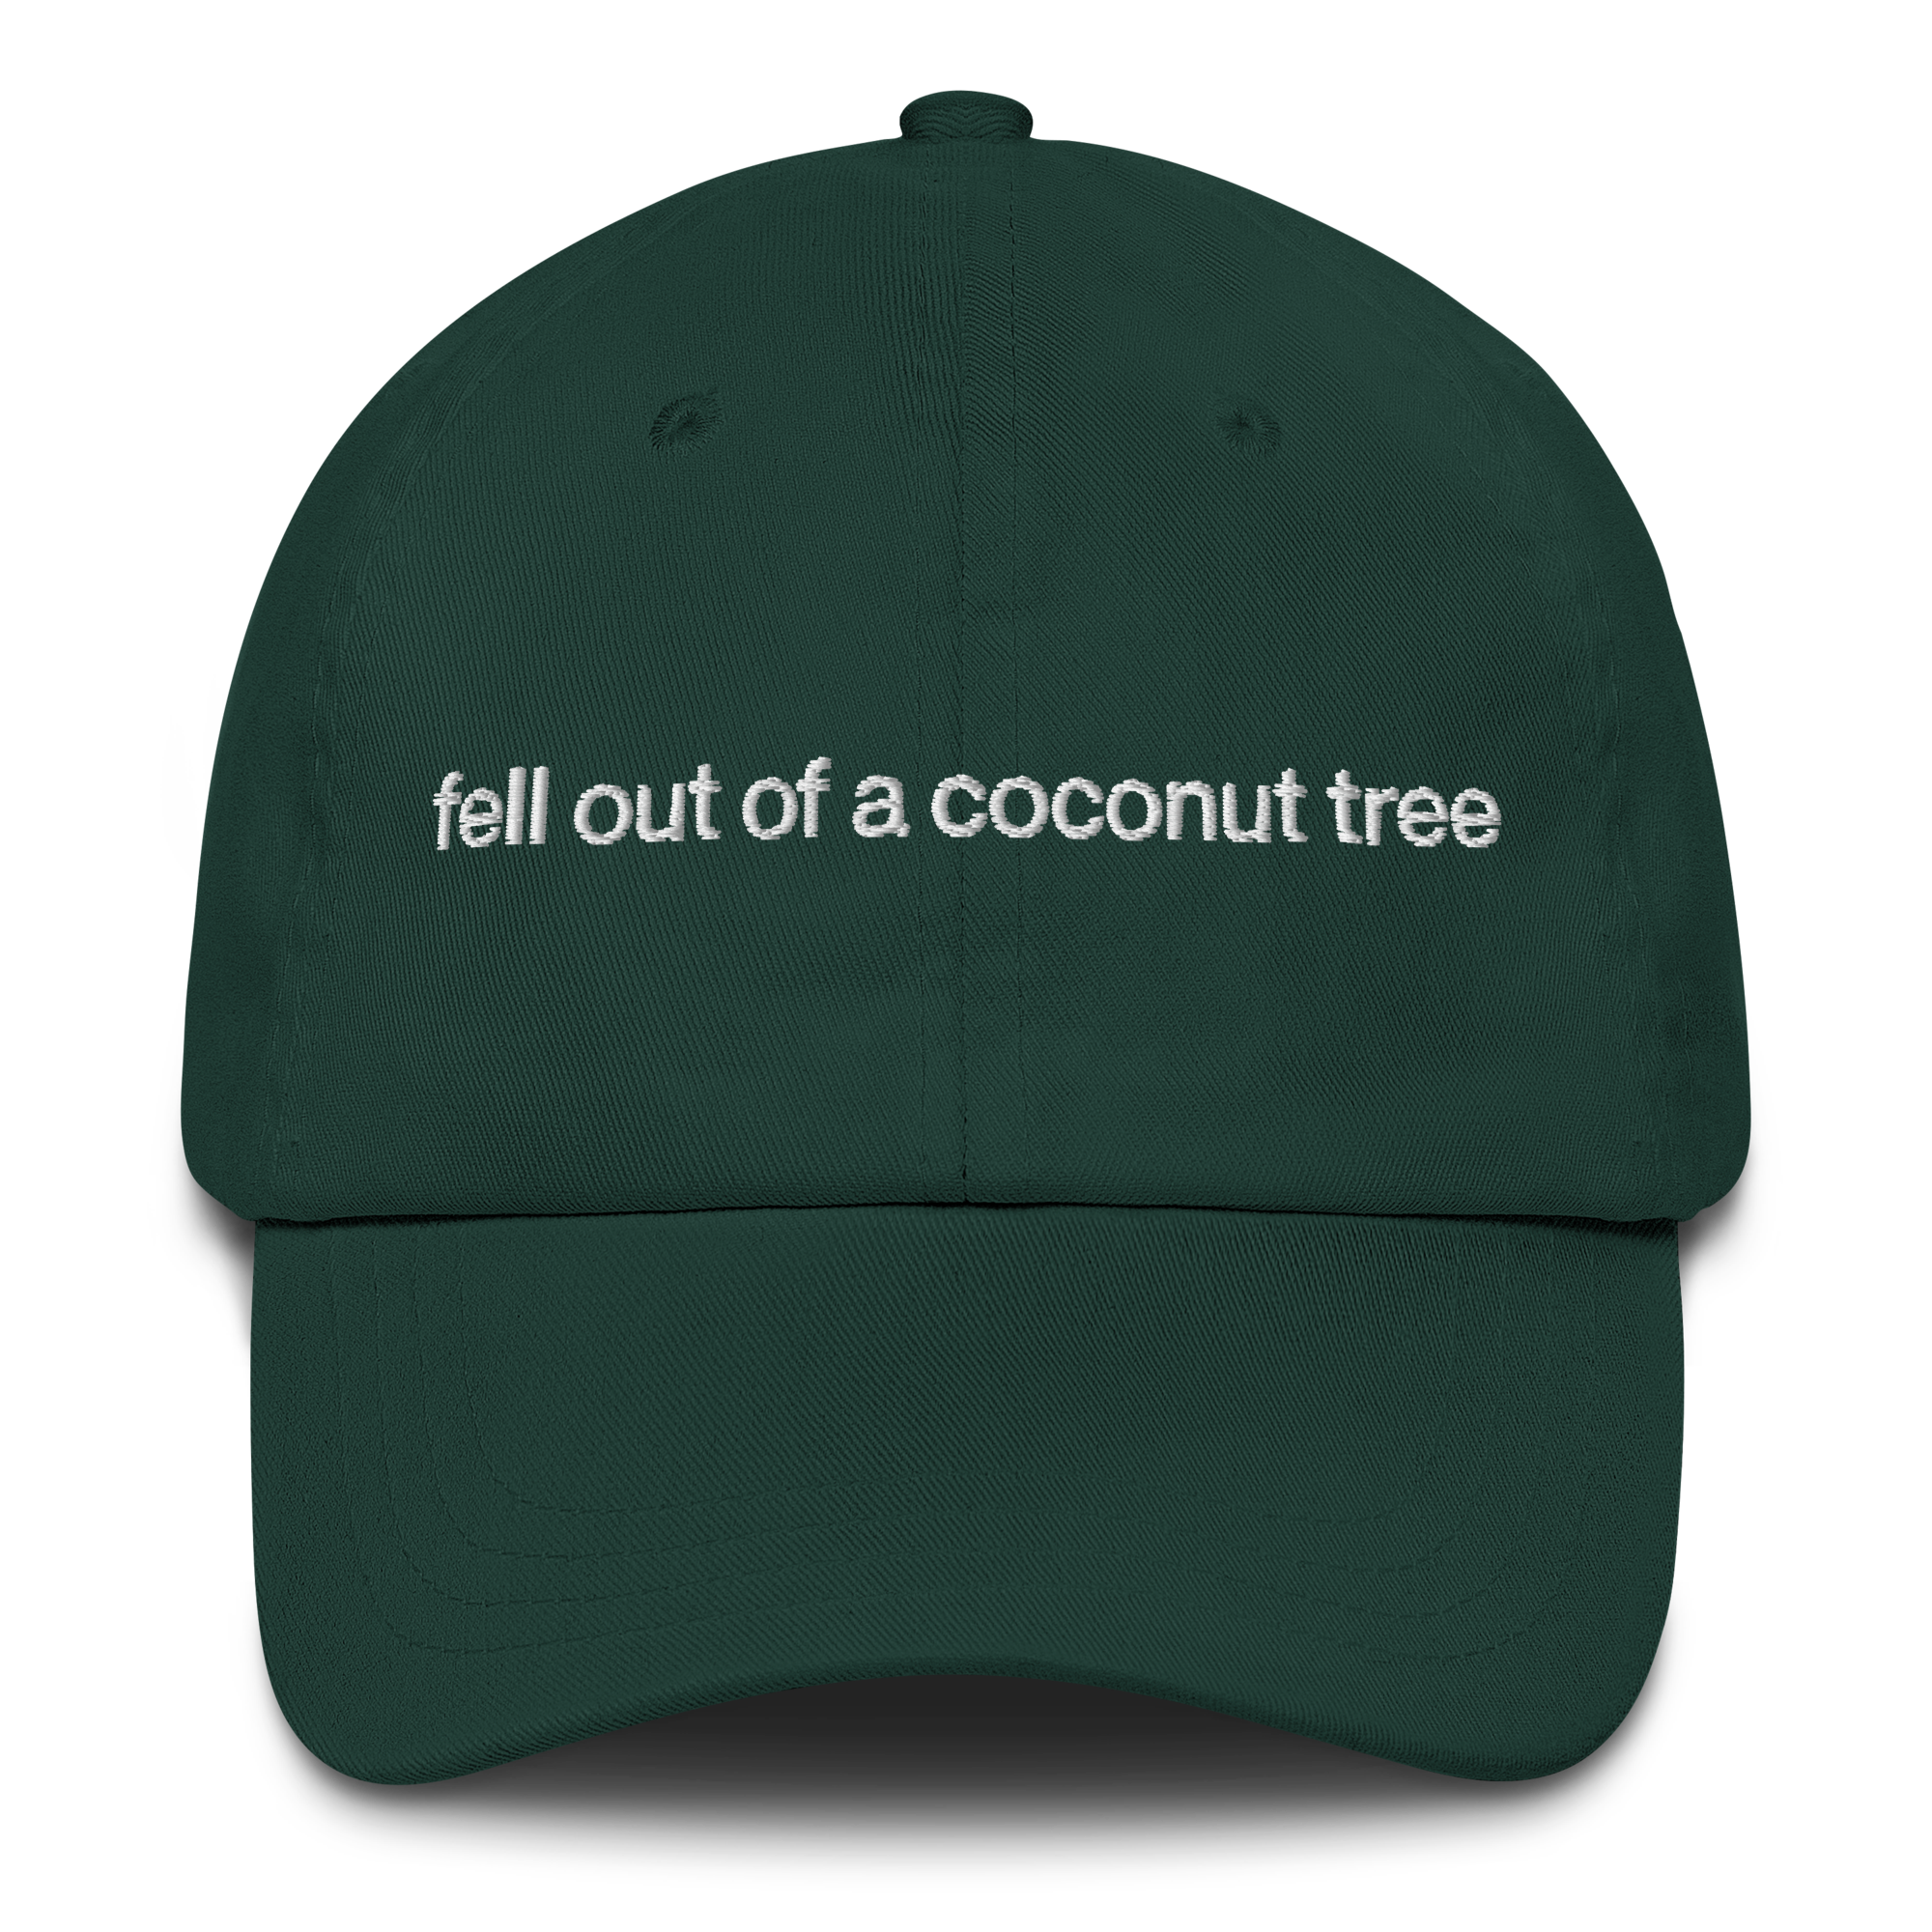 classic-dad-hat-spruce-front-669e8590edc7b.png